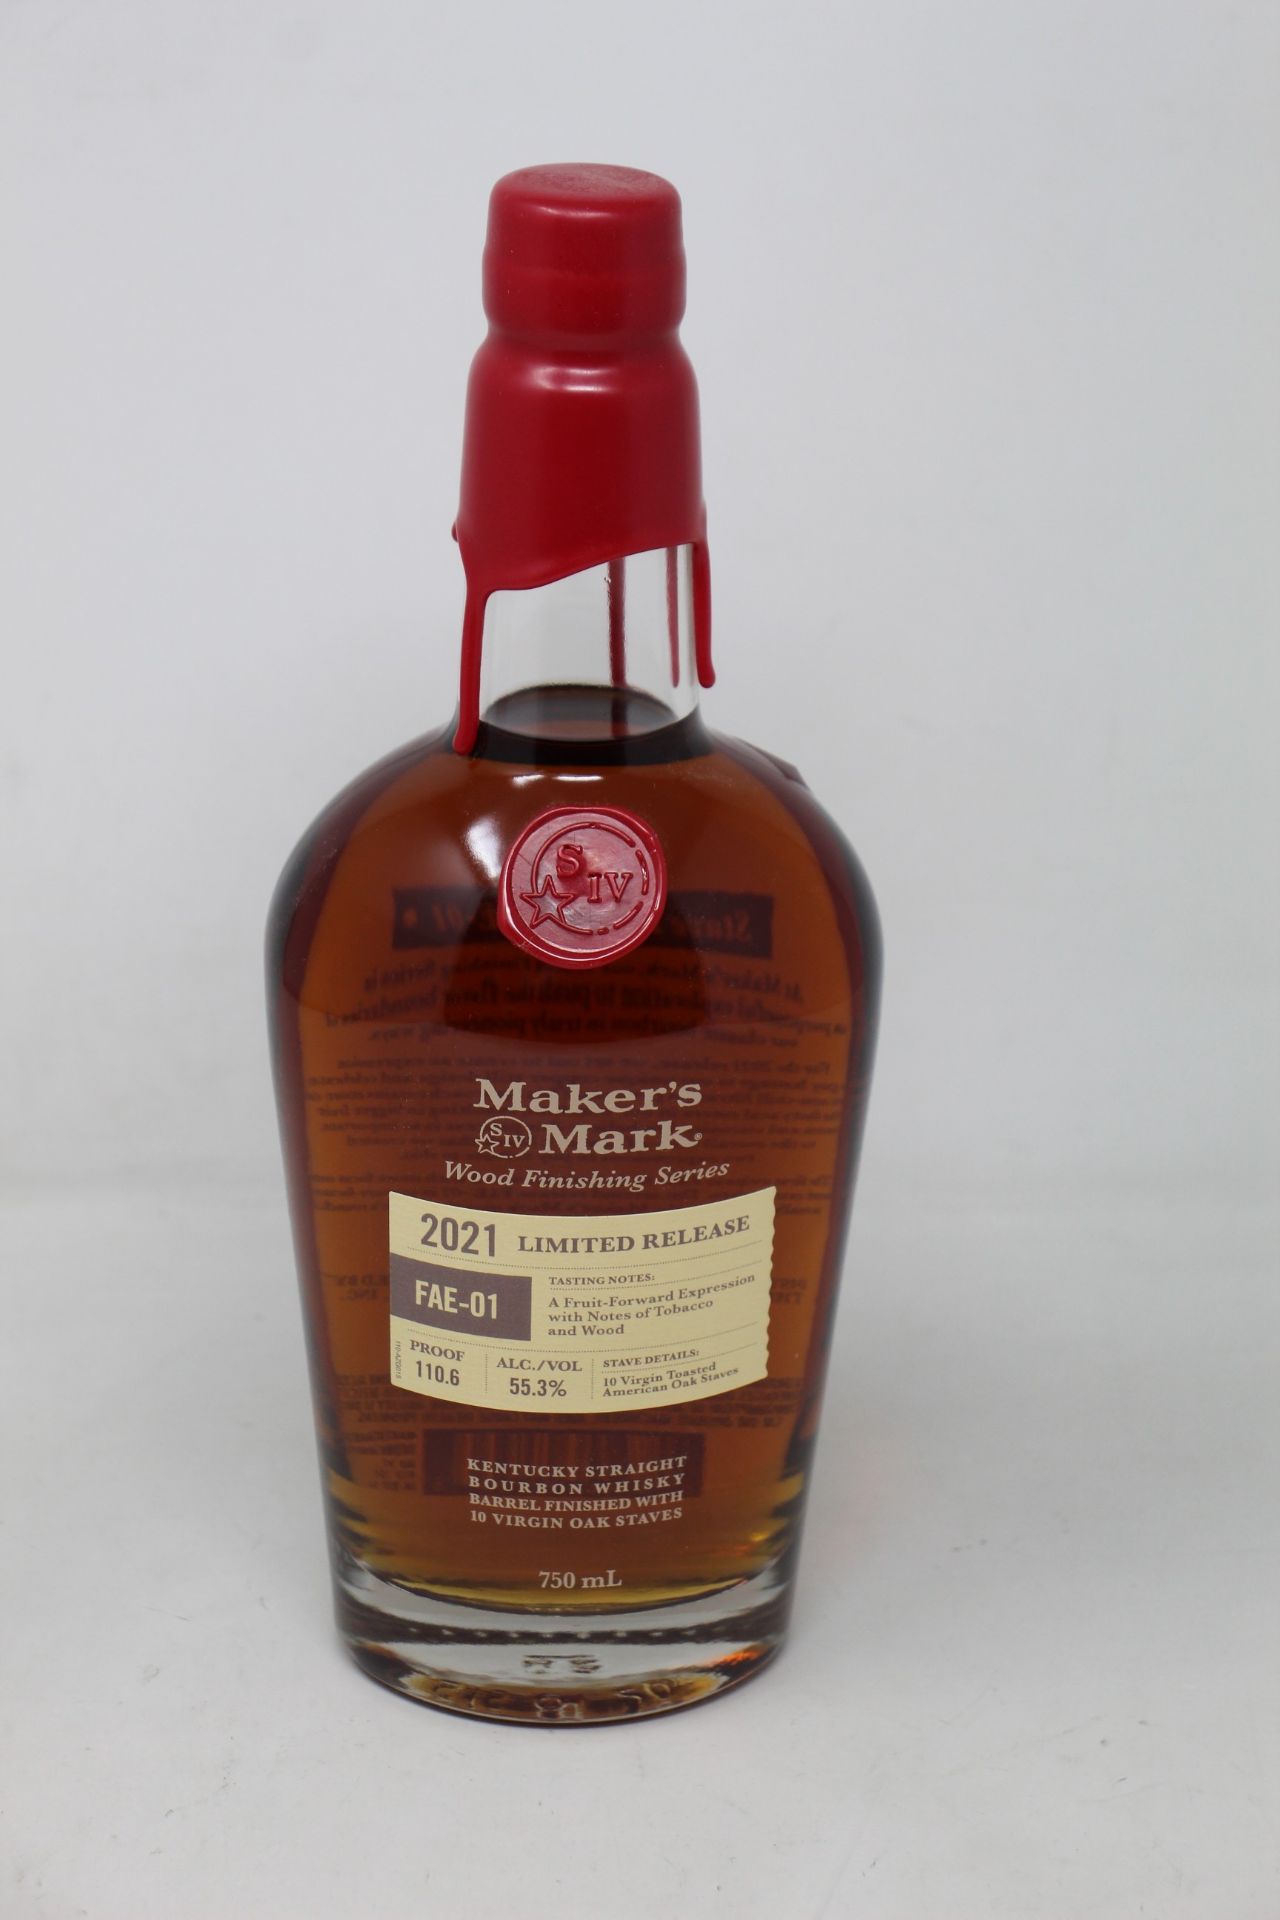 A bottle of Makers Mark 2021 wood finishing series limited release Kentucky straight Bourbon